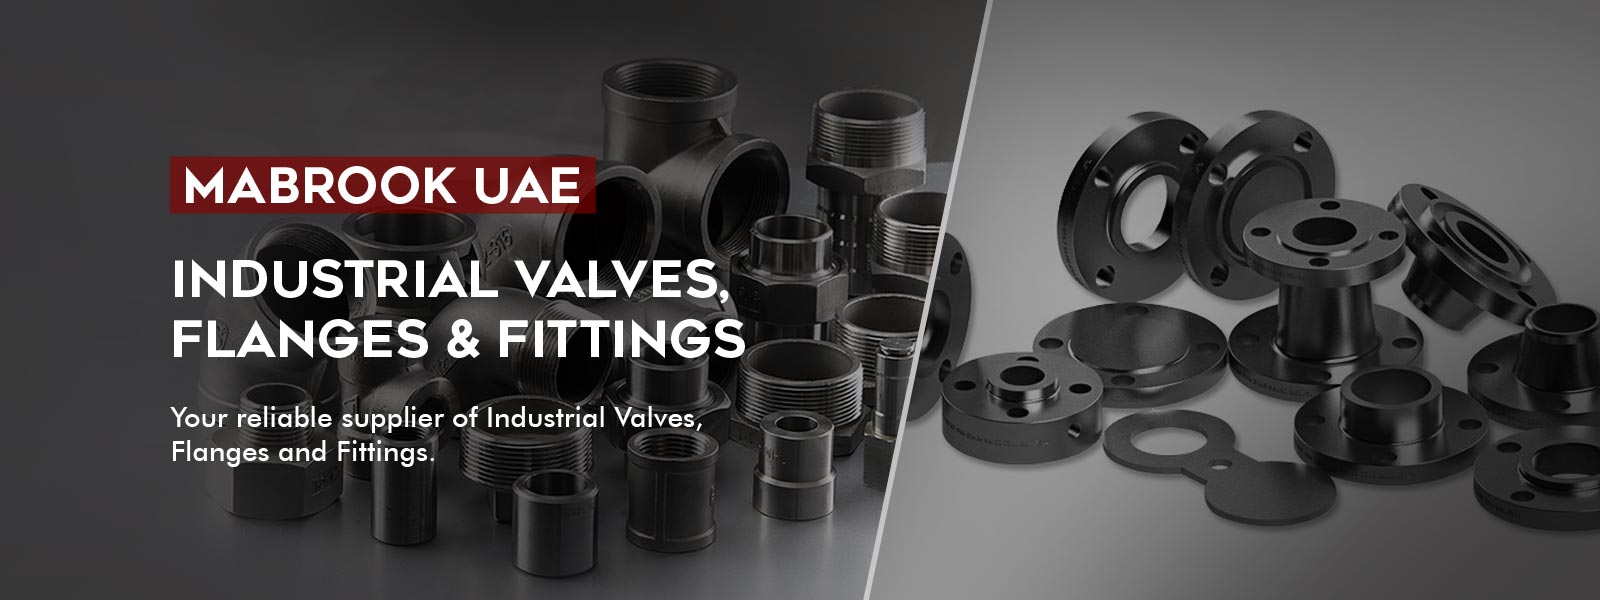 Mabrook Hardware Trading LLC - Trusted Supplier for Industrial Valves, Pipe Fittings and more across UAE, Dubai, Ajman, Sharjah and other Gulf and African countries